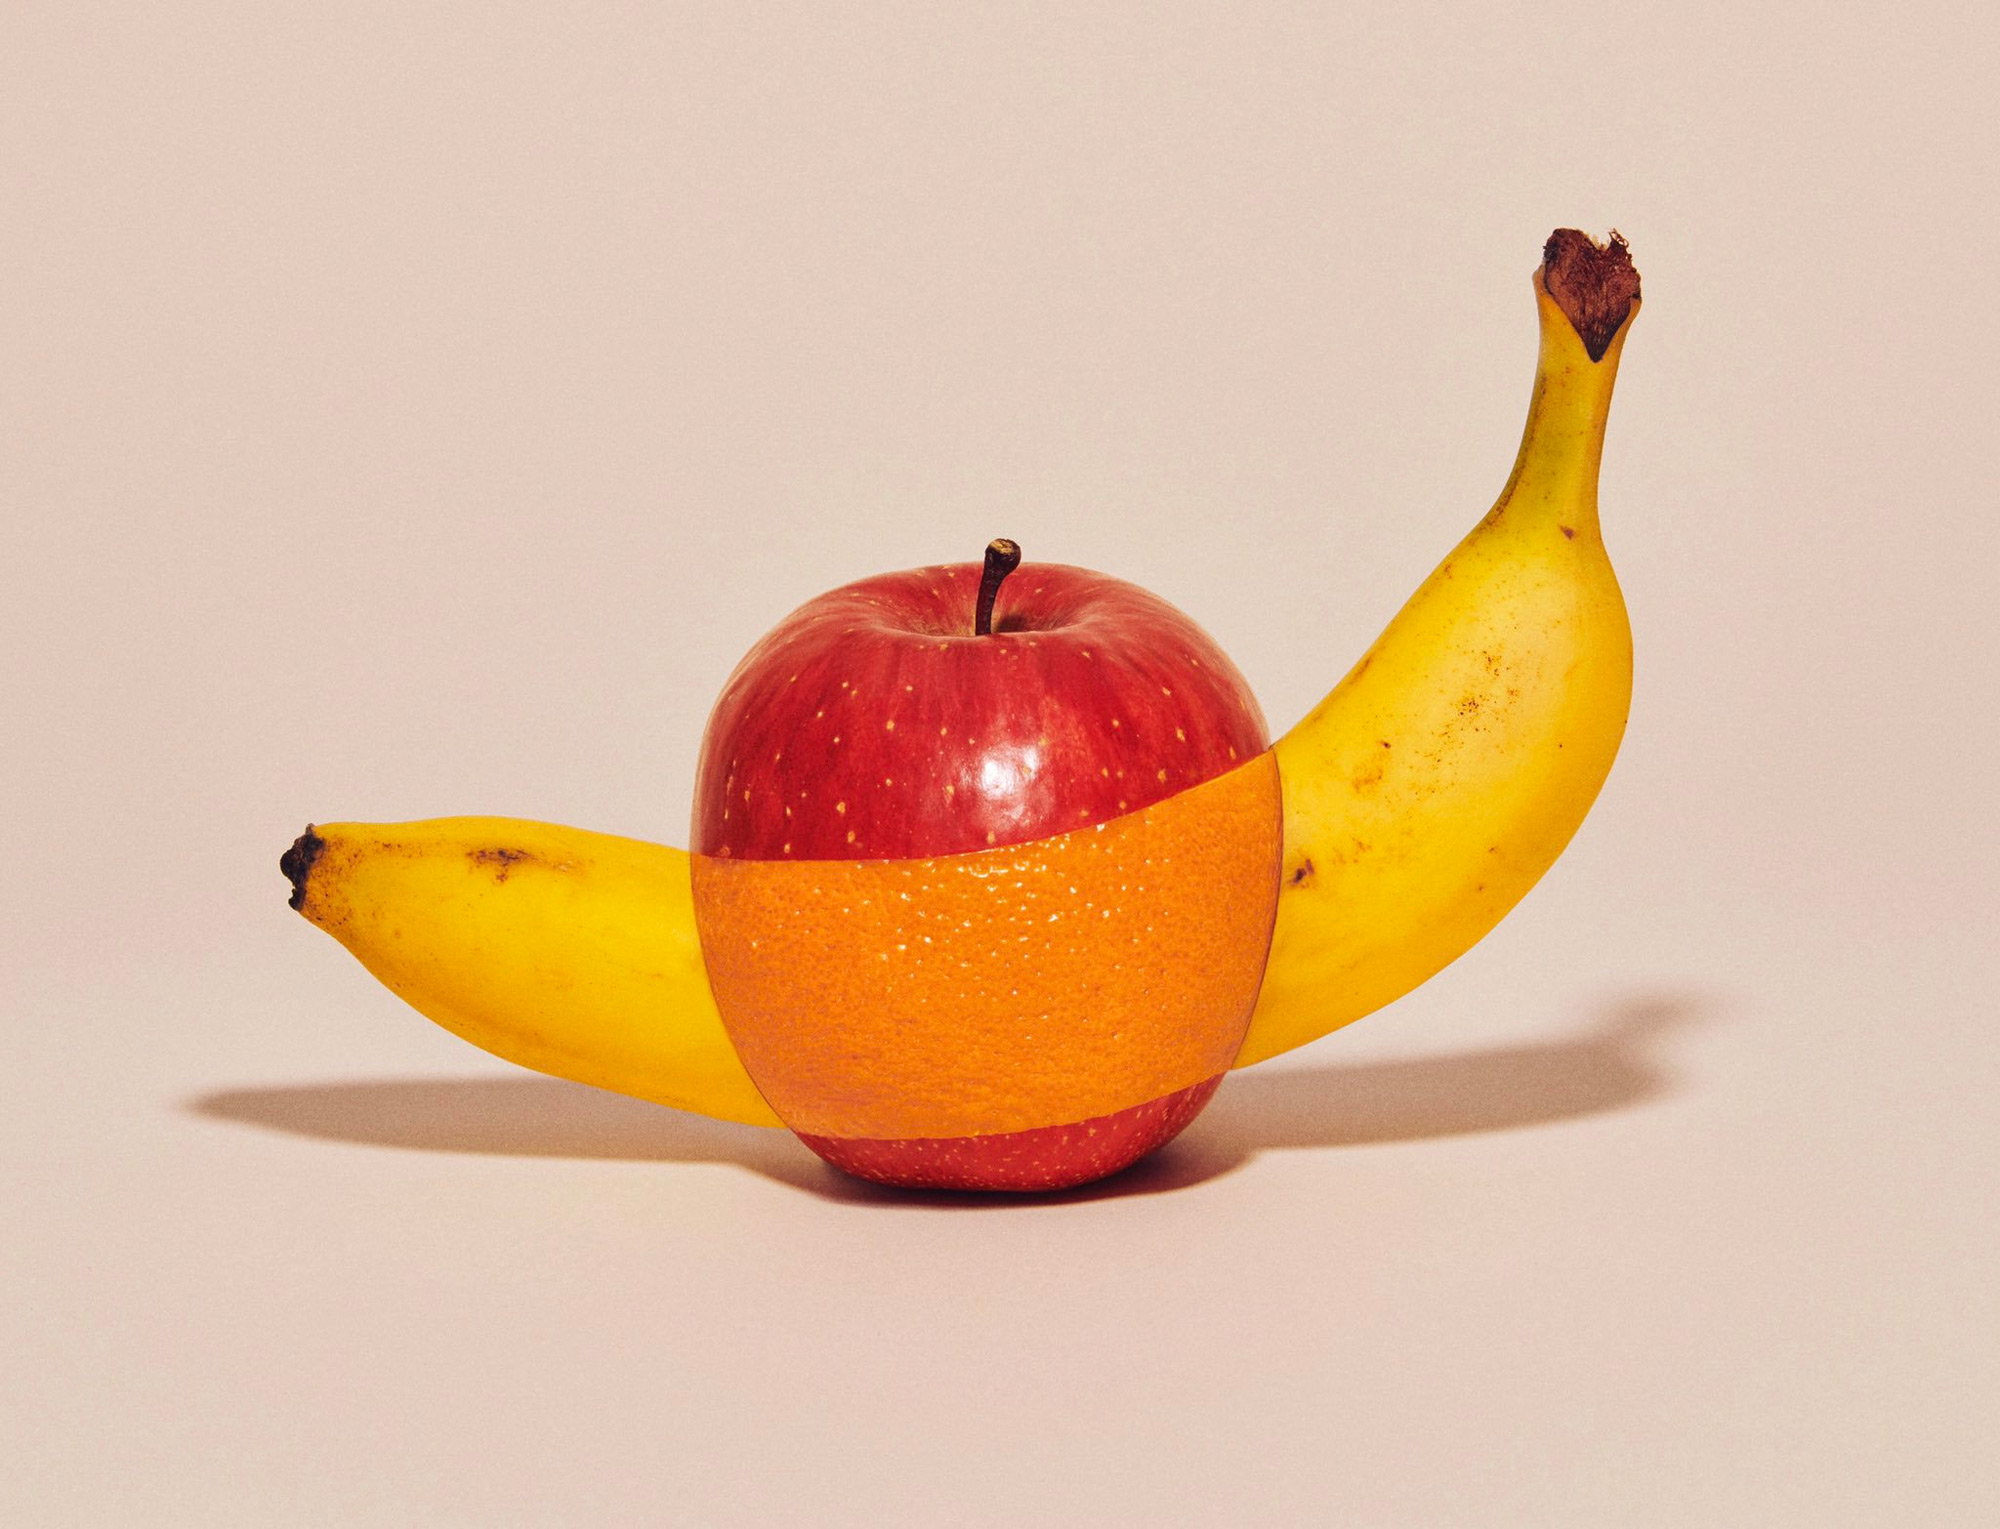 Apples and Oranges Come Together Photographs of Spliced Fruits by Yuni Yoshida